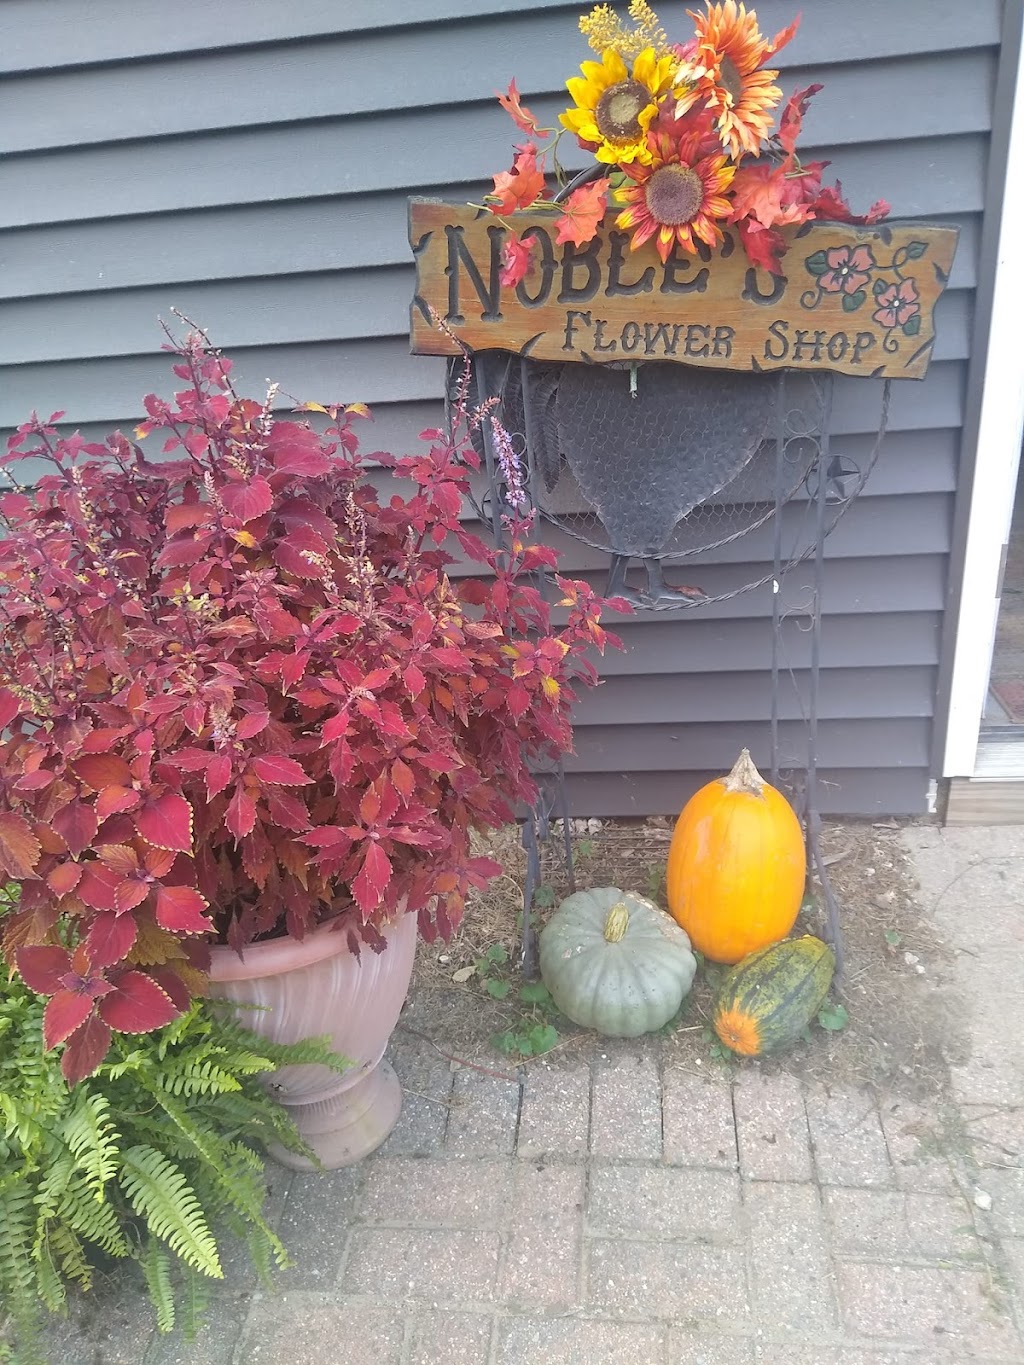 Nobles Farm Stand and Flower Shop | 390 E New Lenox Rd, Pittsfield, MA 01201 | Phone: (413) 443-2210